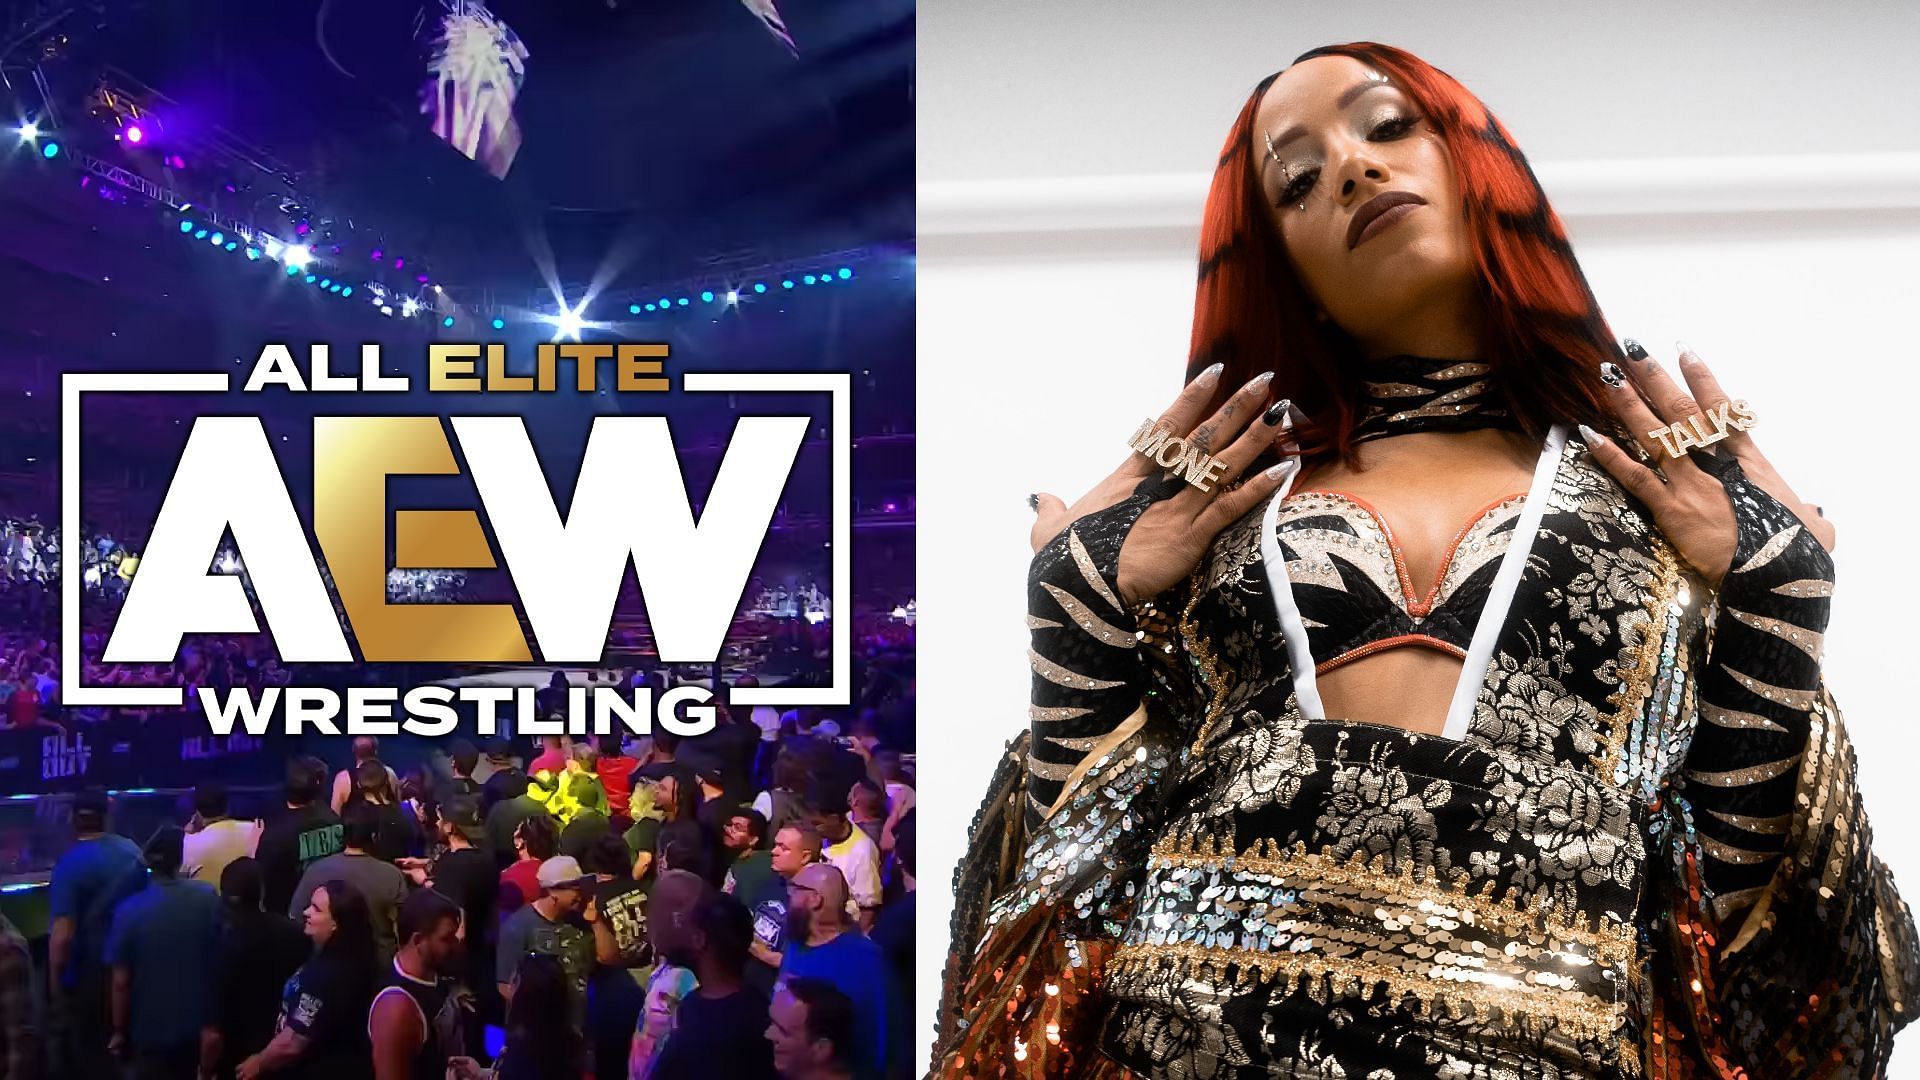 Mercedes Mone is reportedly heading to All Elite Wrestling